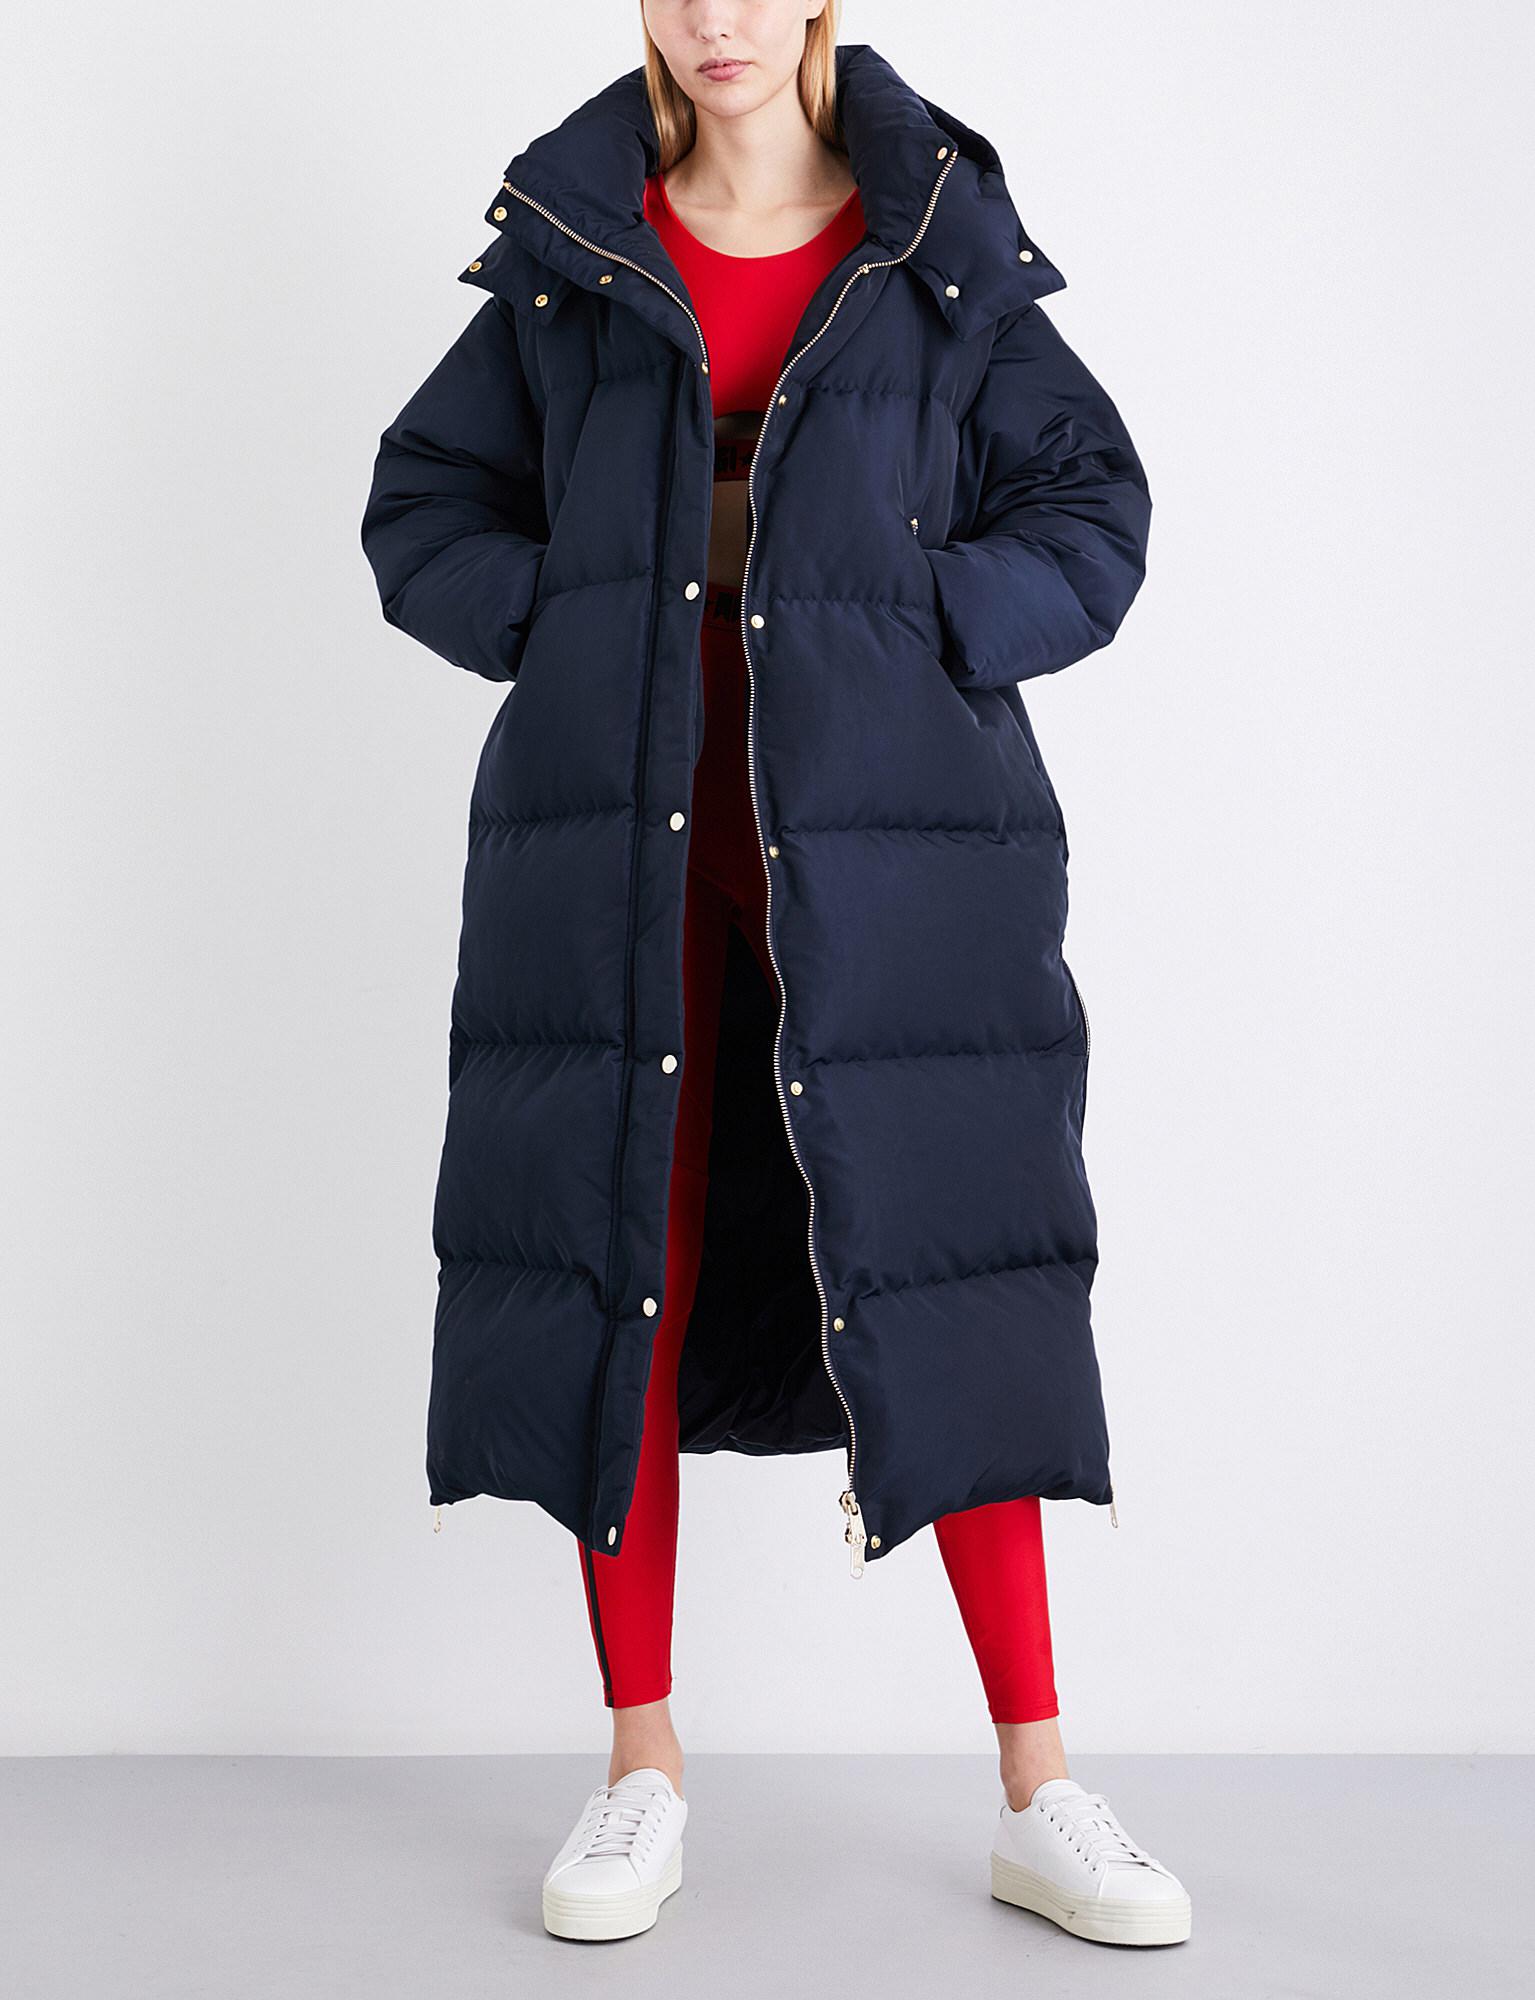 Tommy Hilfiger X Gigi Hadid Oversized Padded Hooded Shell Coat in Midnight  (Blue) - Lyst